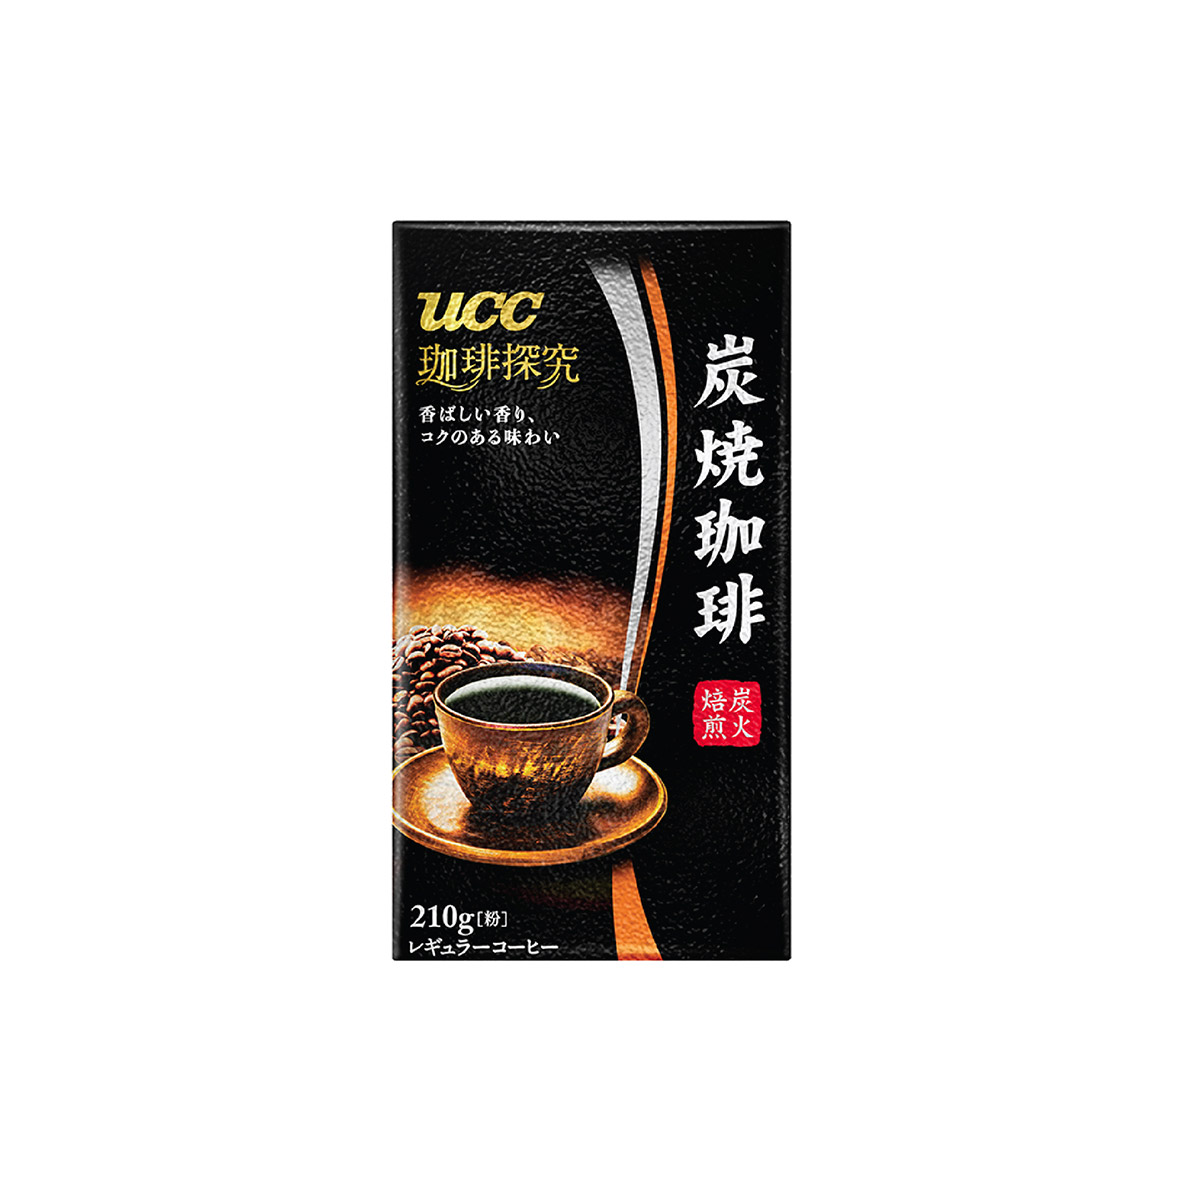 UCC Exploration of Charcoal-Grilled Coffee